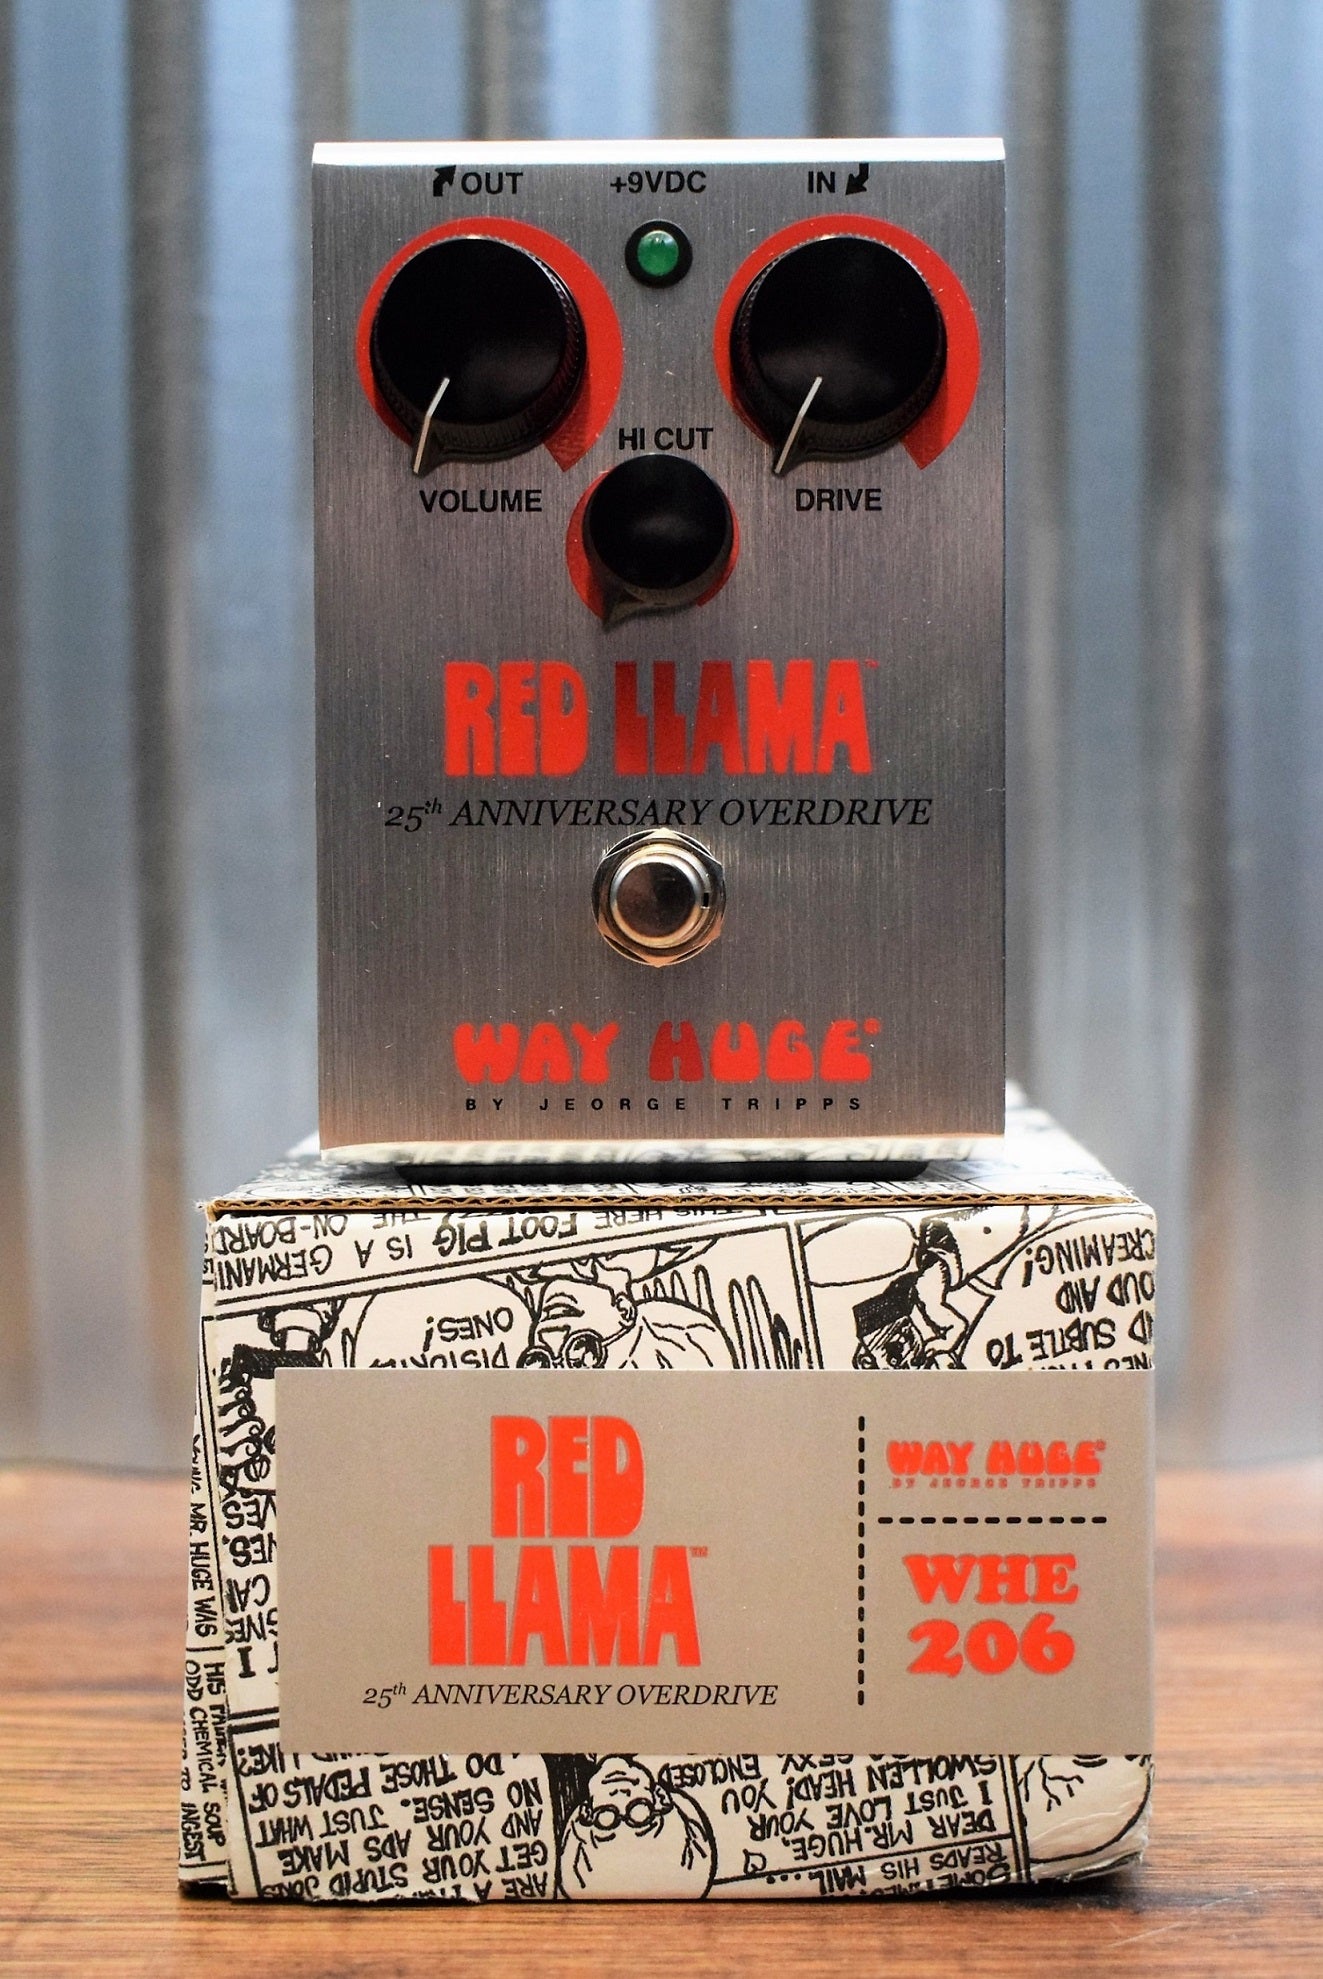 Dunlop Way Huge WHE206 Red Llama 25th Anniversary Overdrive Guitar Effect Pedal